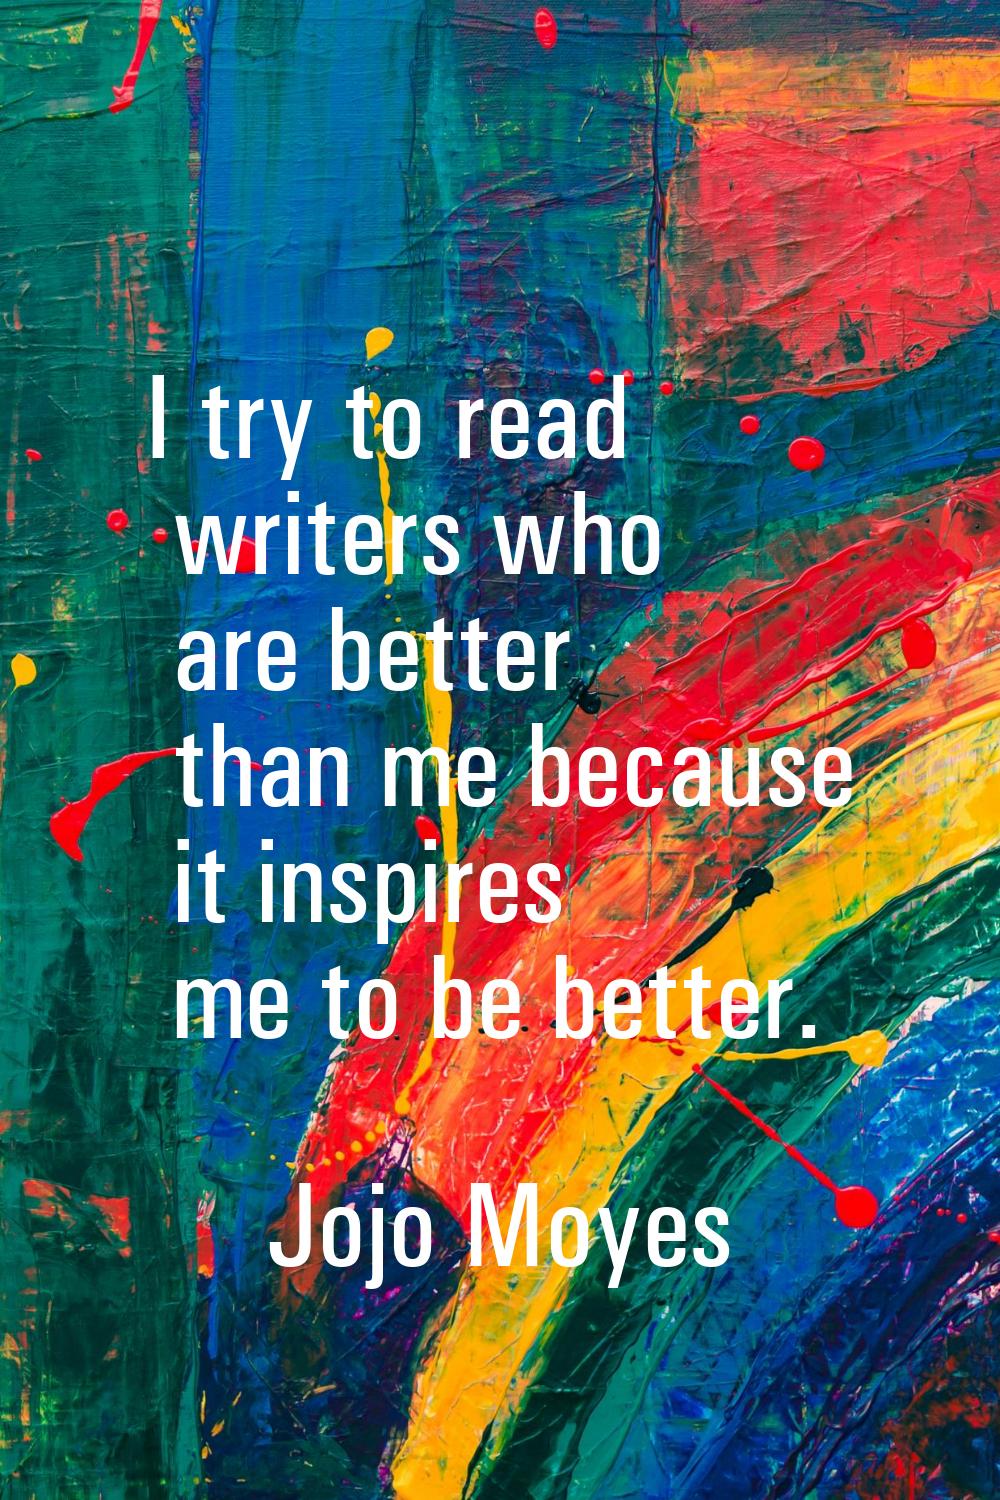 I try to read writers who are better than me because it inspires me to be better.